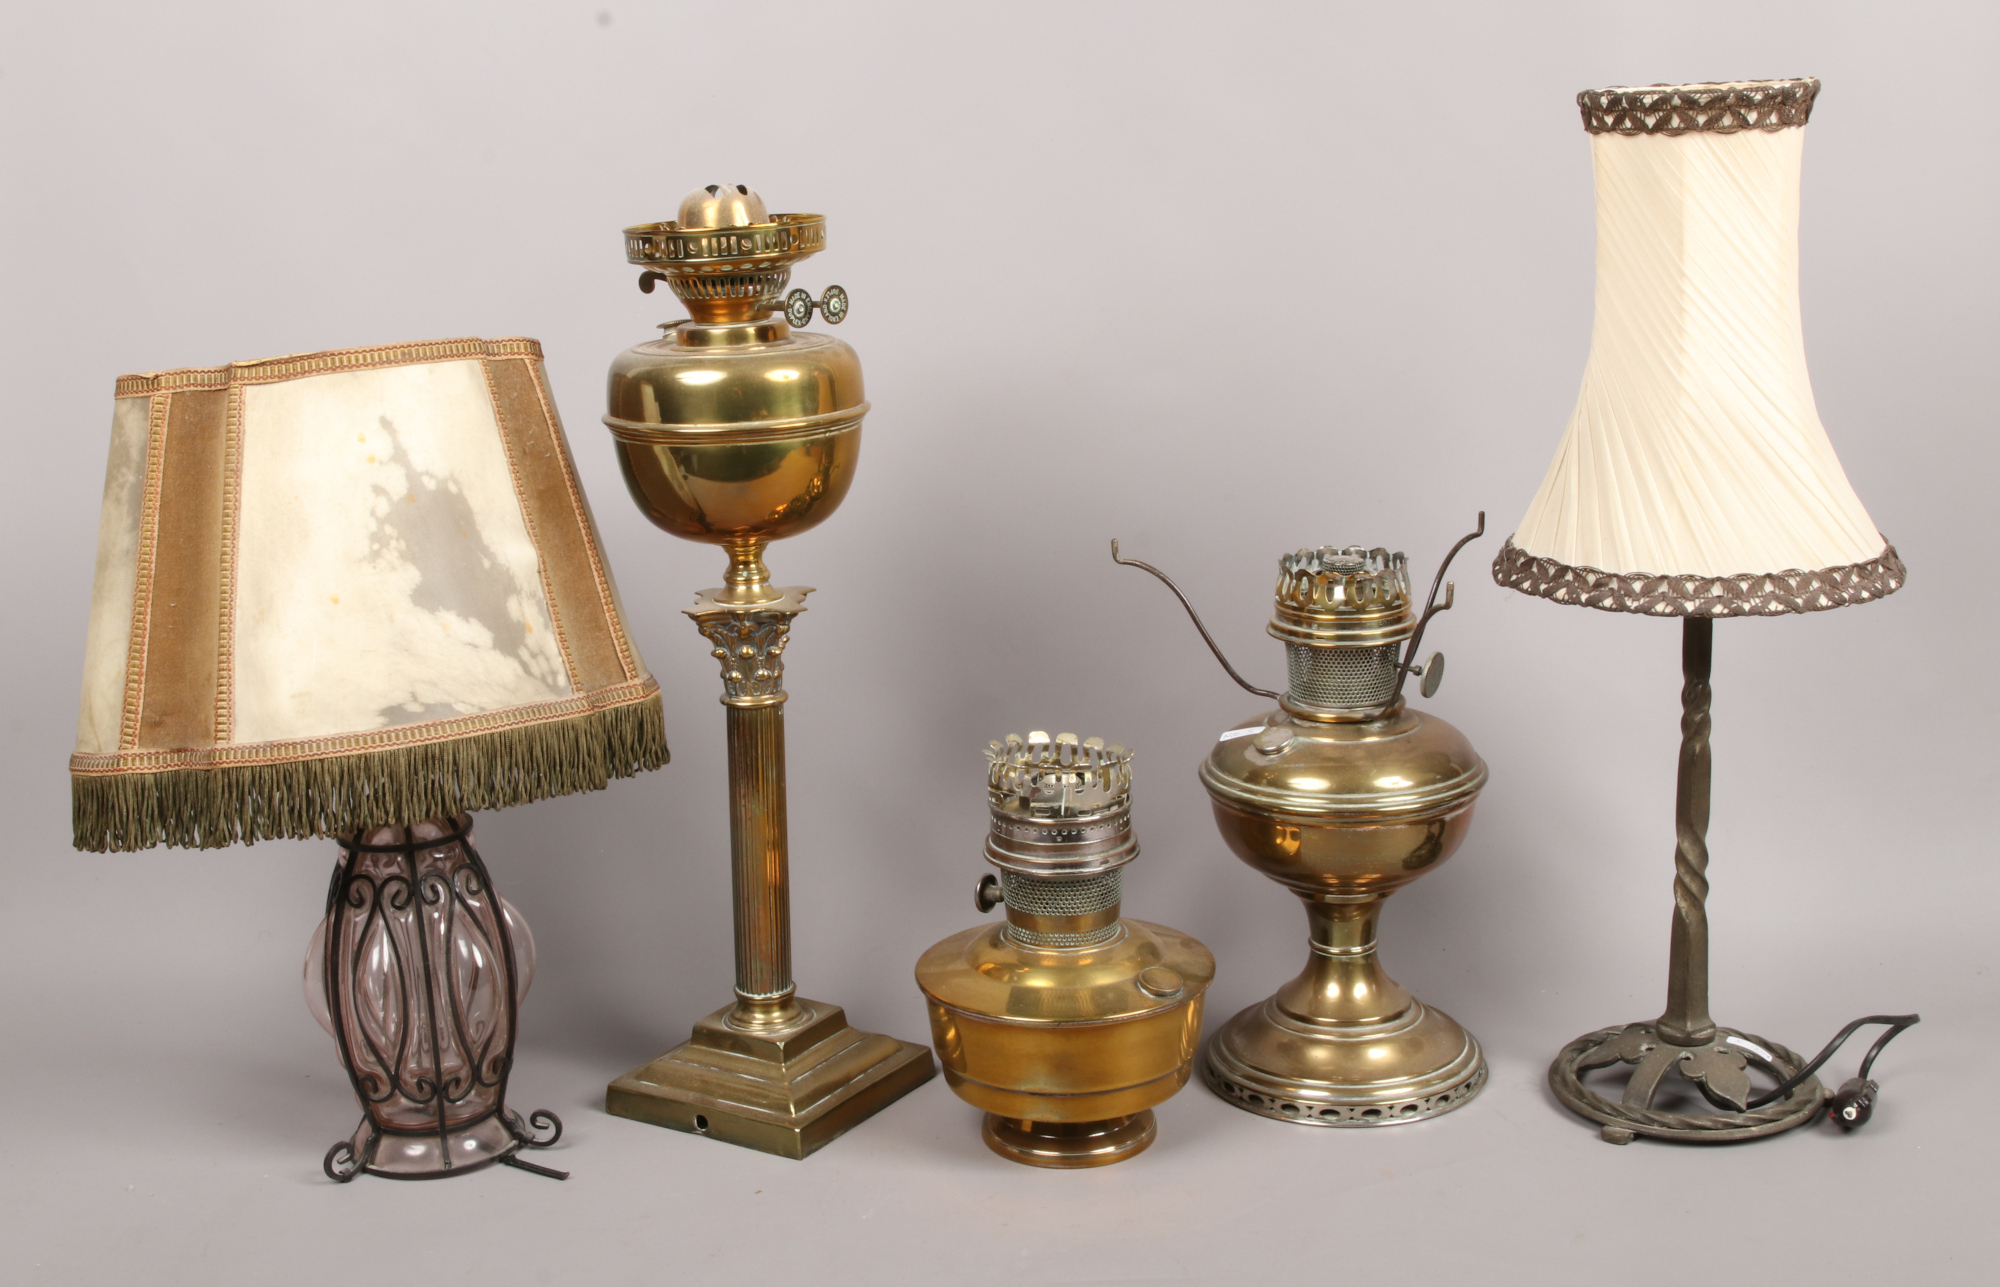 Three brass based oil lamps to include Corinthian column, along with a wrought iron and wire work